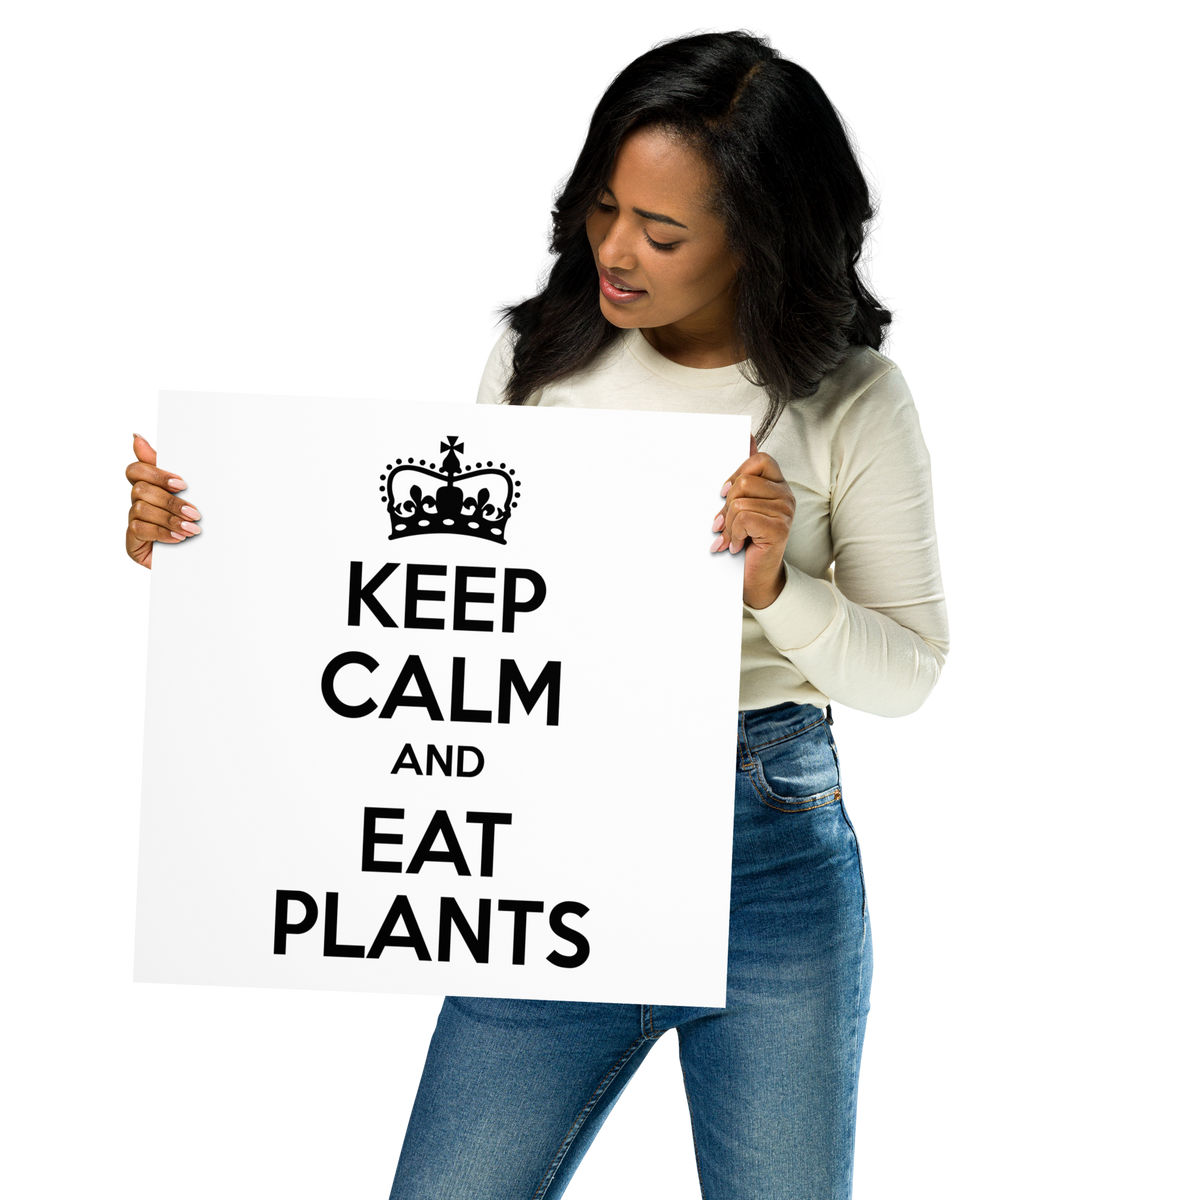 KEEP CALM AND EAT PLANTS Poster